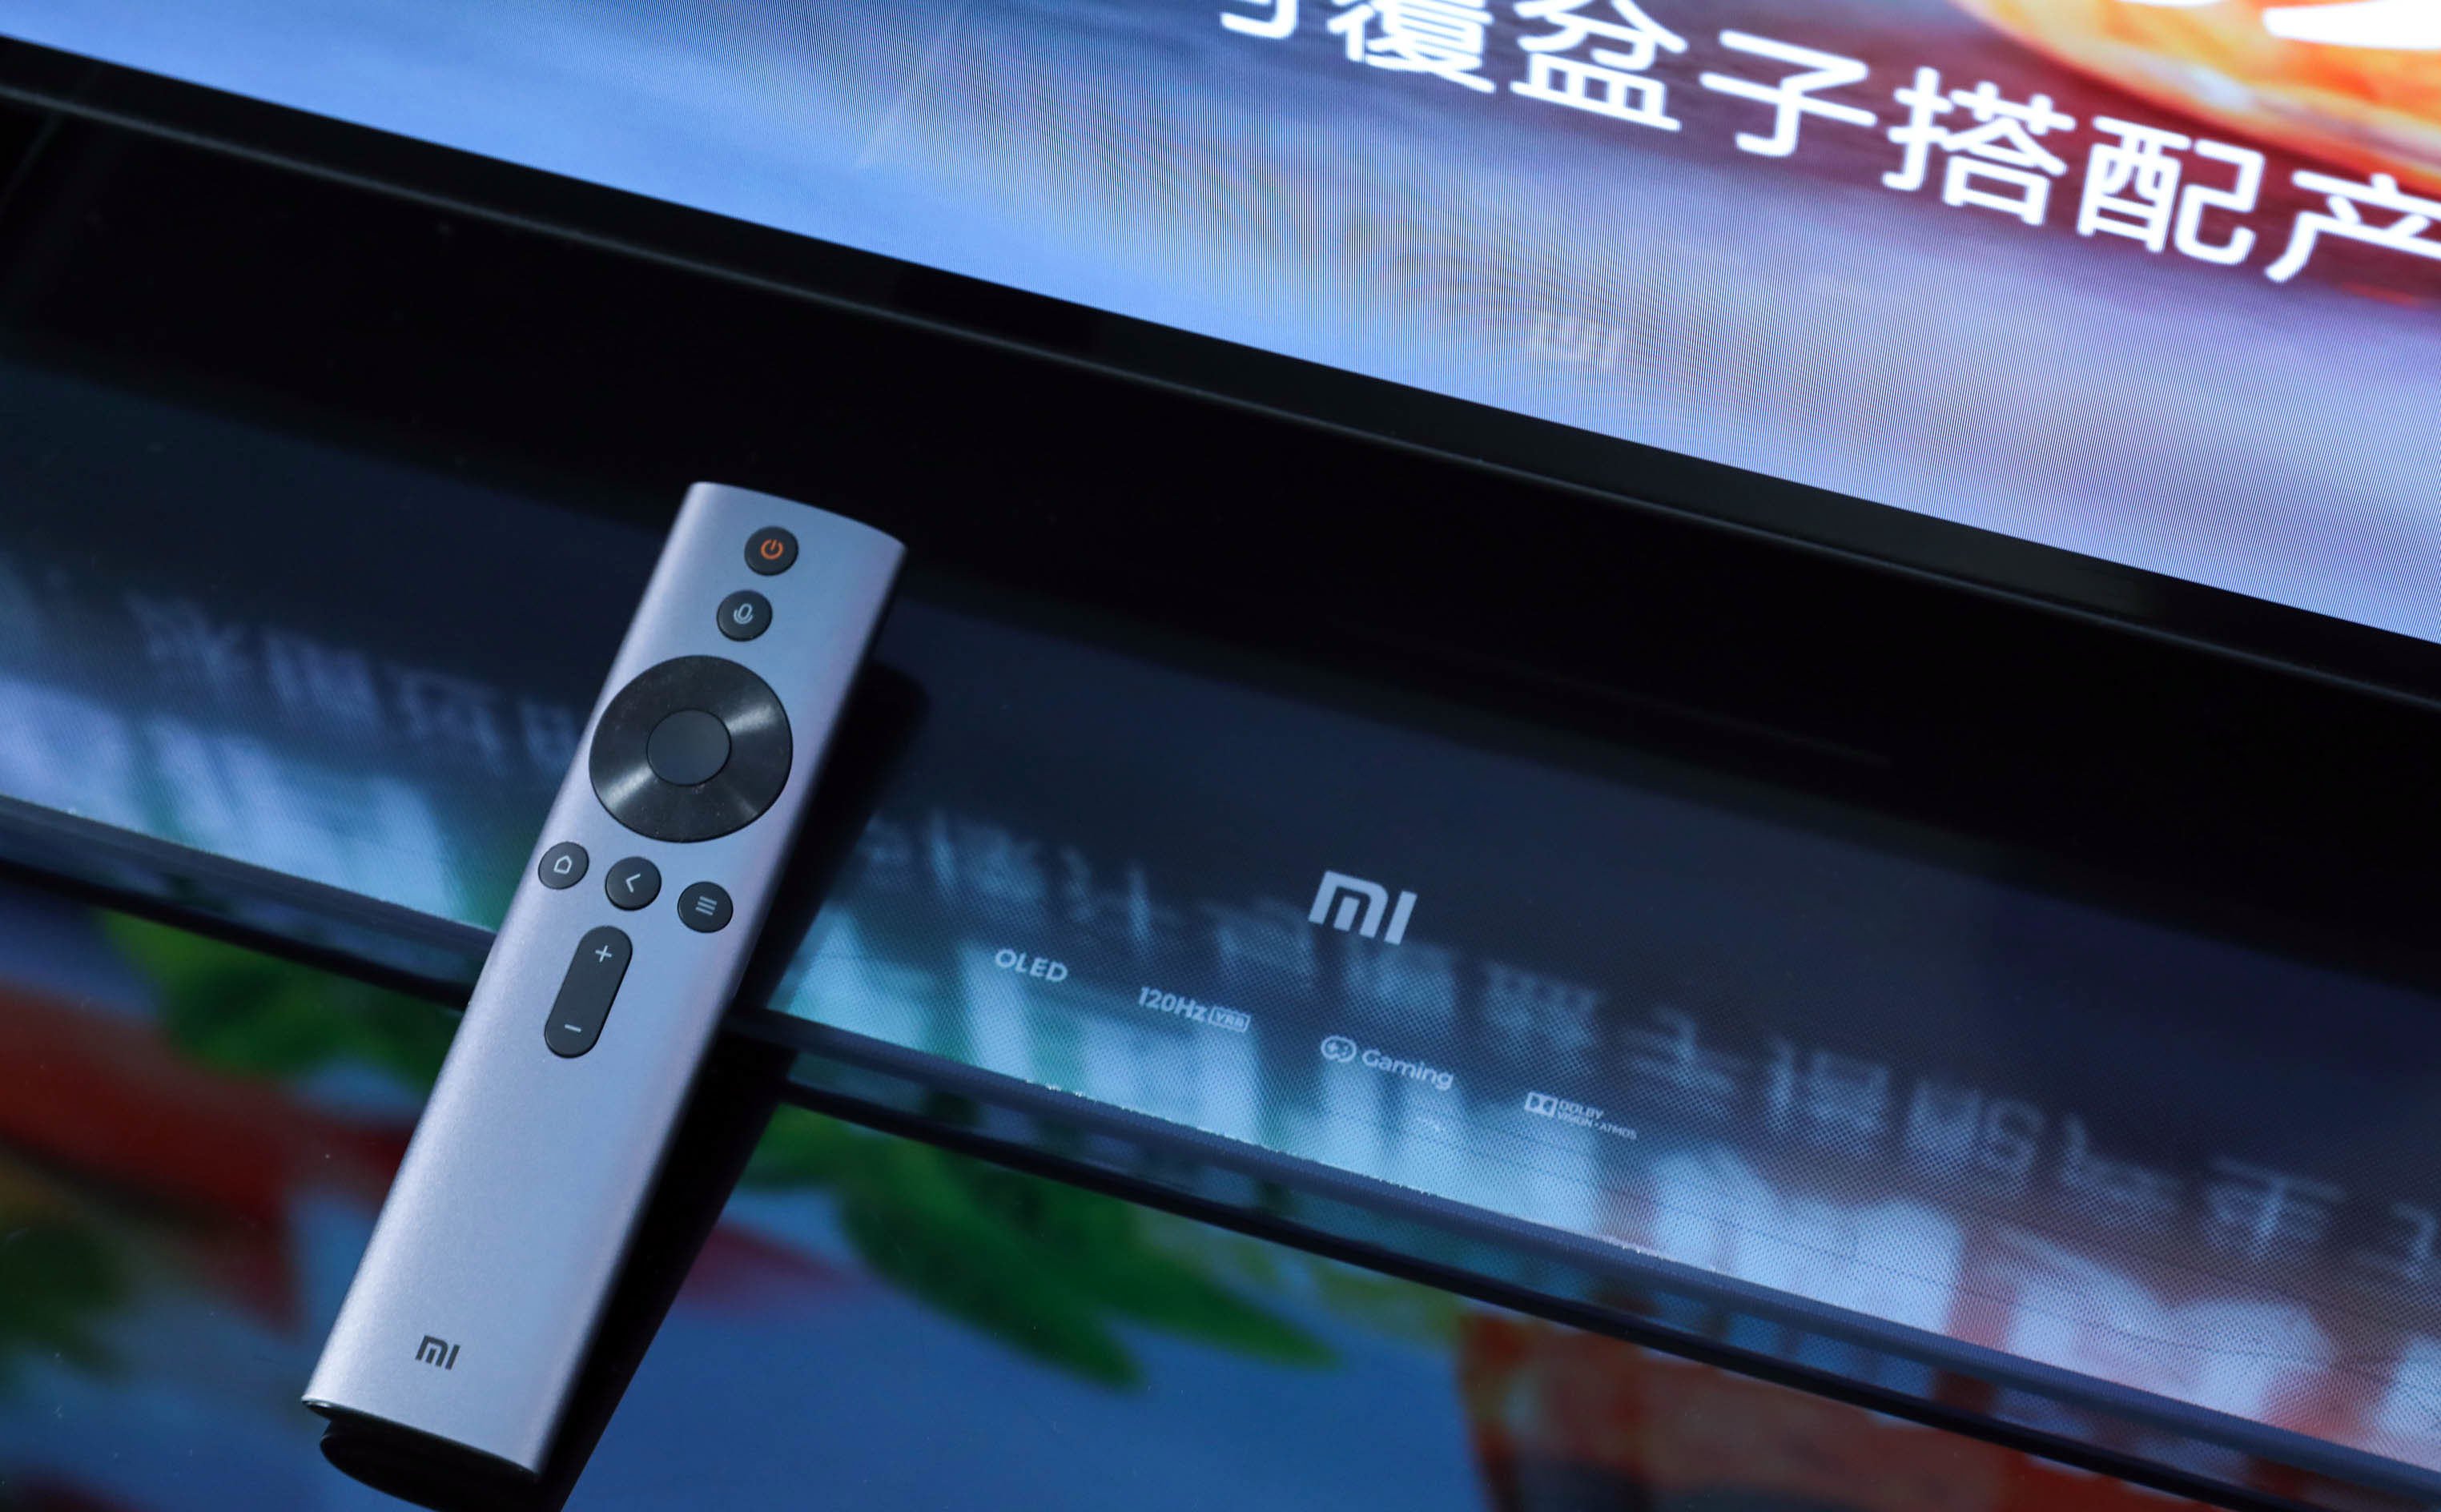 Xiaomi Mi TV is going to remove ads